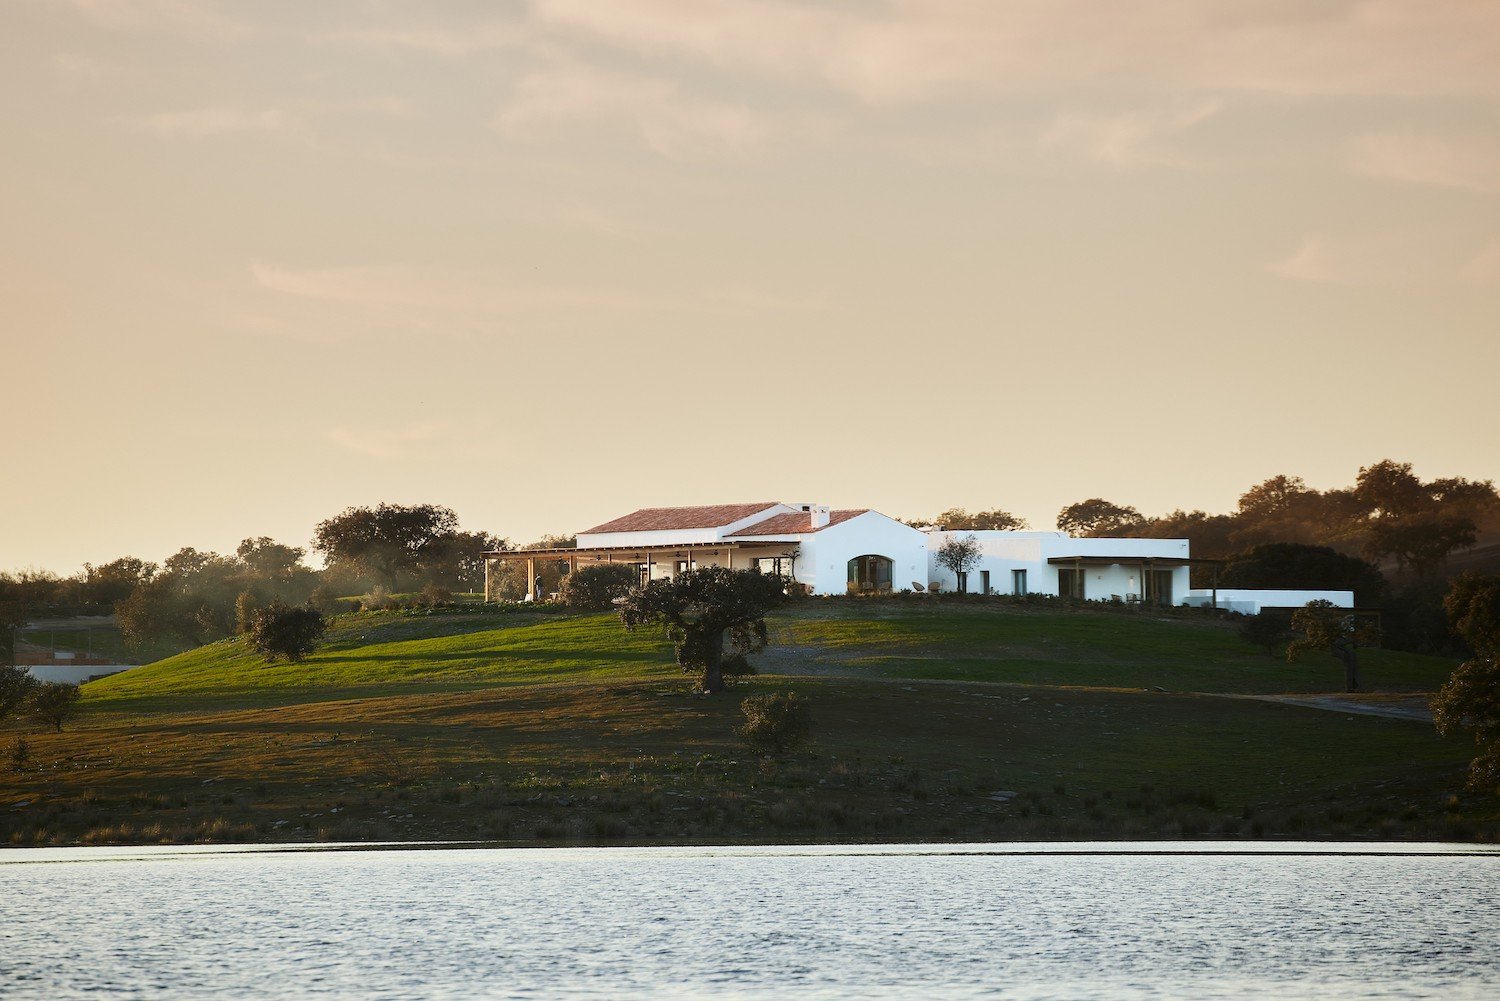 Luxury lakeside estate for a seminar on Lake Alqueva in Portugal, combining work sessions and teambuilding.